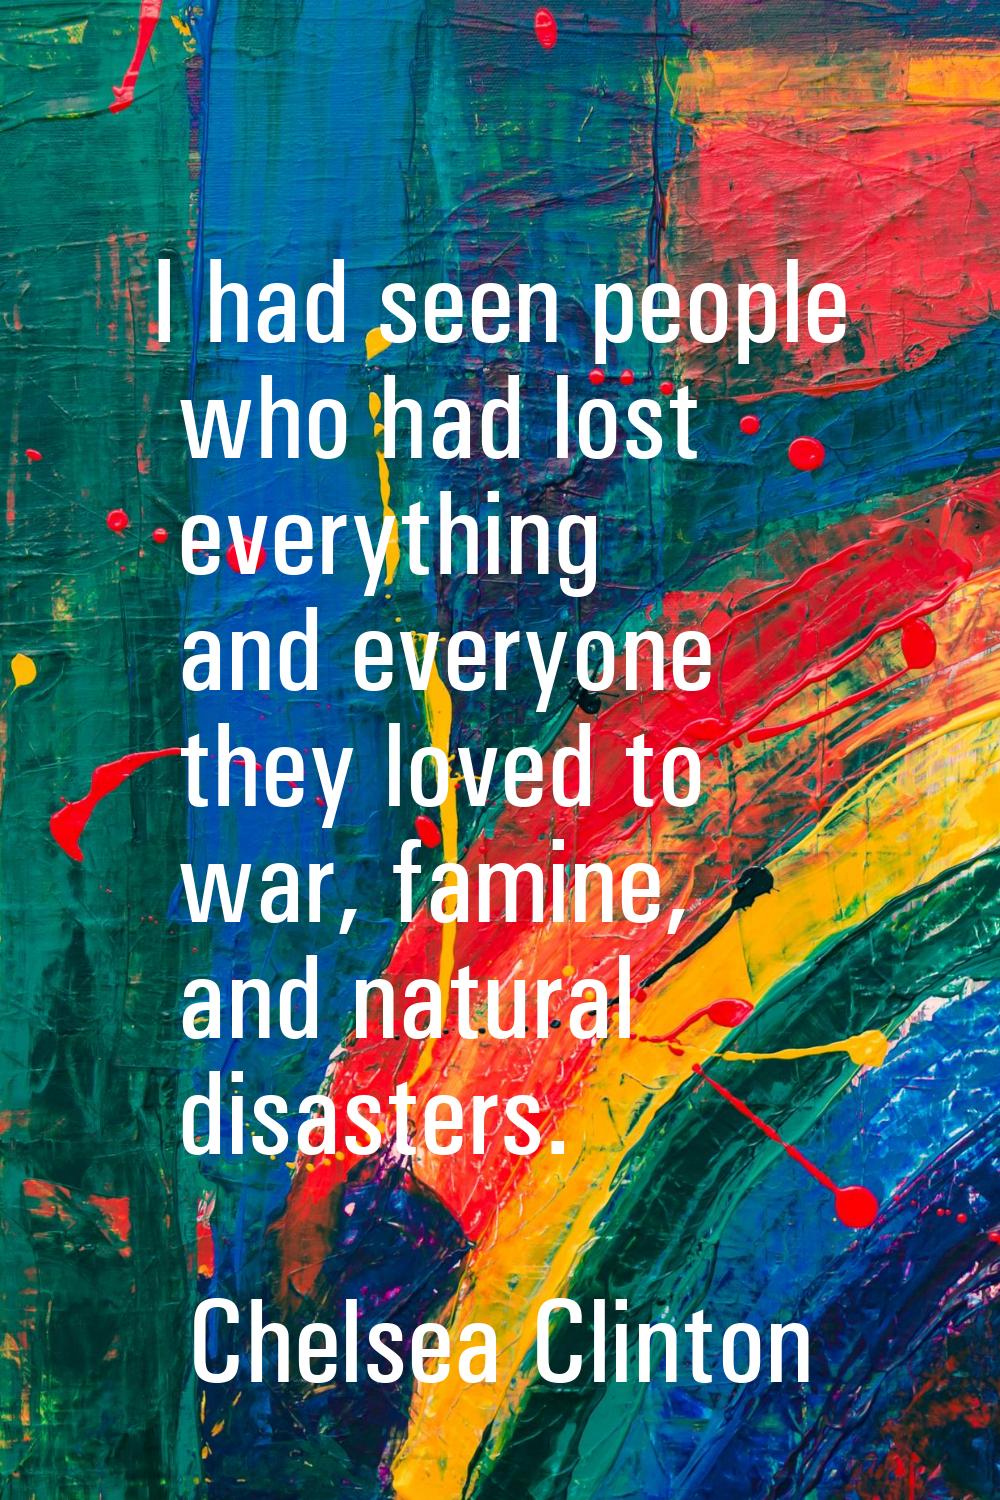 I had seen people who had lost everything and everyone they loved to war, famine, and natural disas